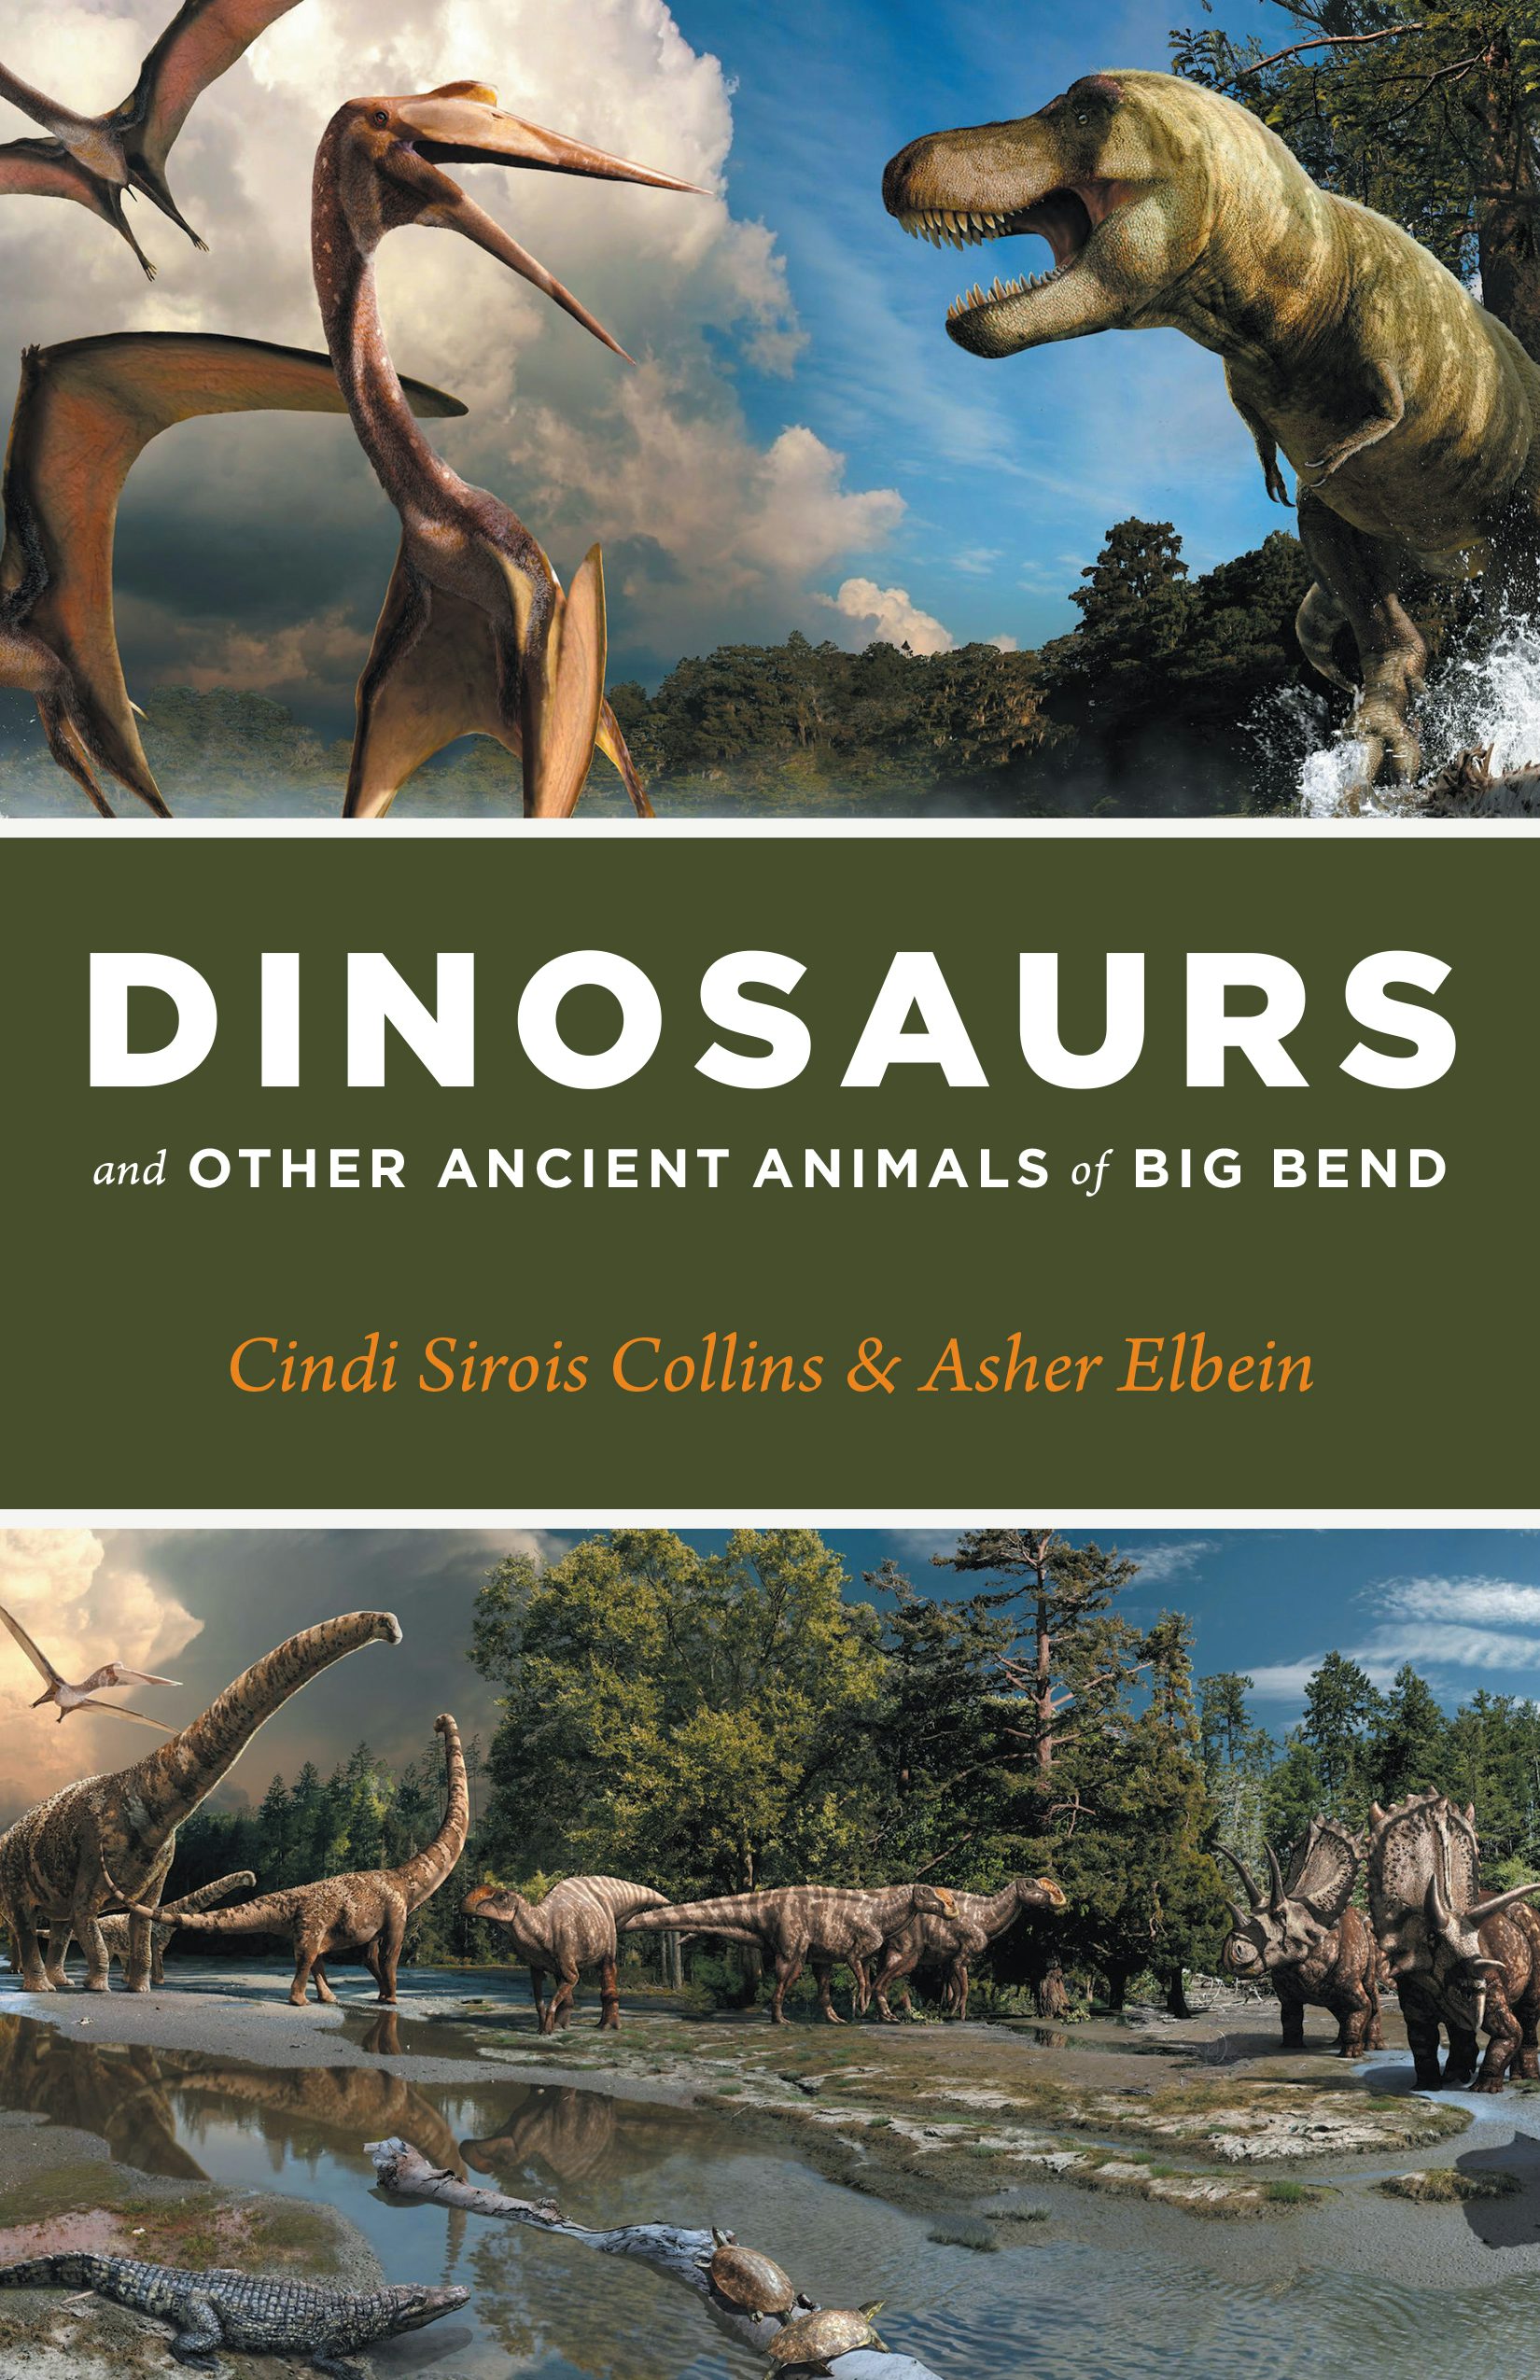 Dinosaurs and Other Ancient Animals of Big Bend by Cindi Sirois Collins and Asher Elbein